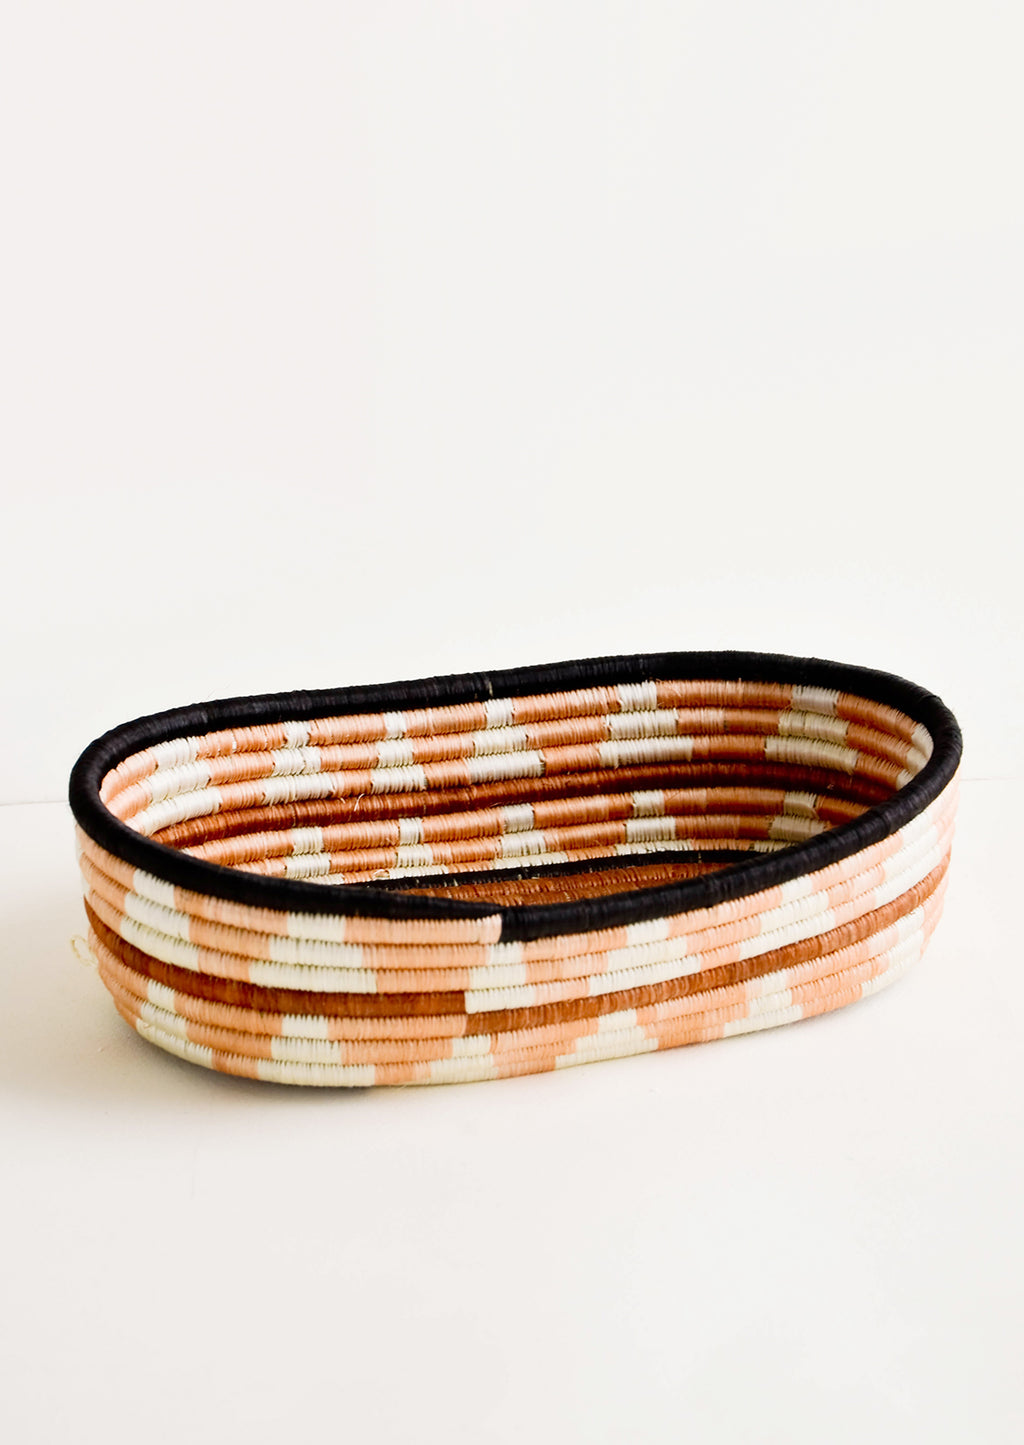 Peach Multi: Oval shaped shallow bread basket made from woven natural grass in peachy geometric pattern